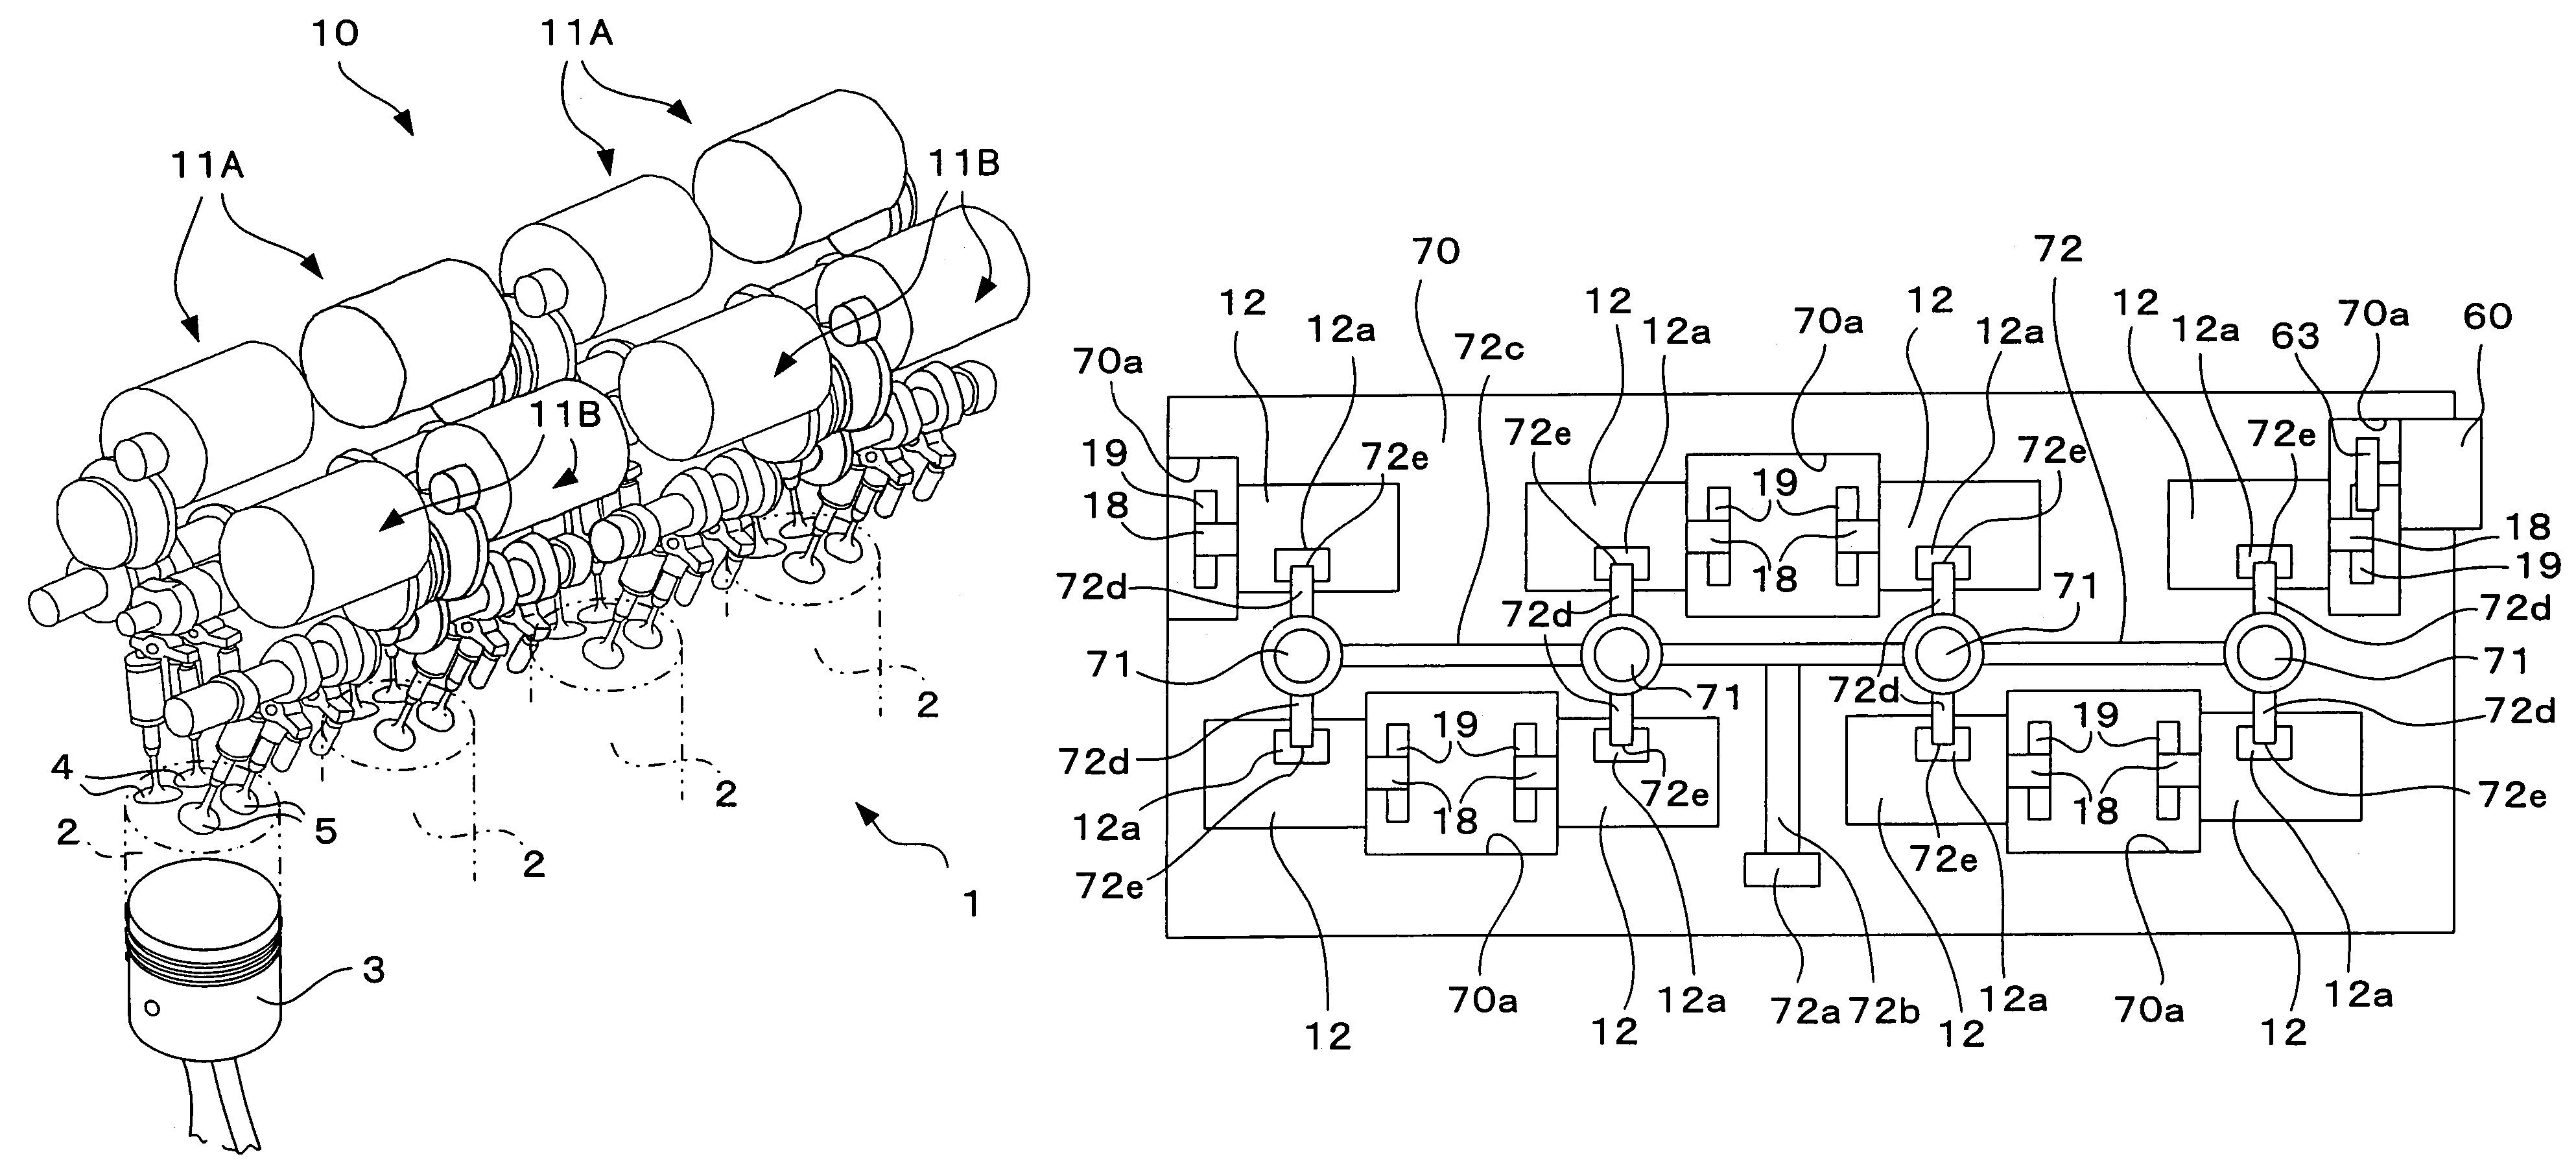 Valve-driving system of internal combustion engine